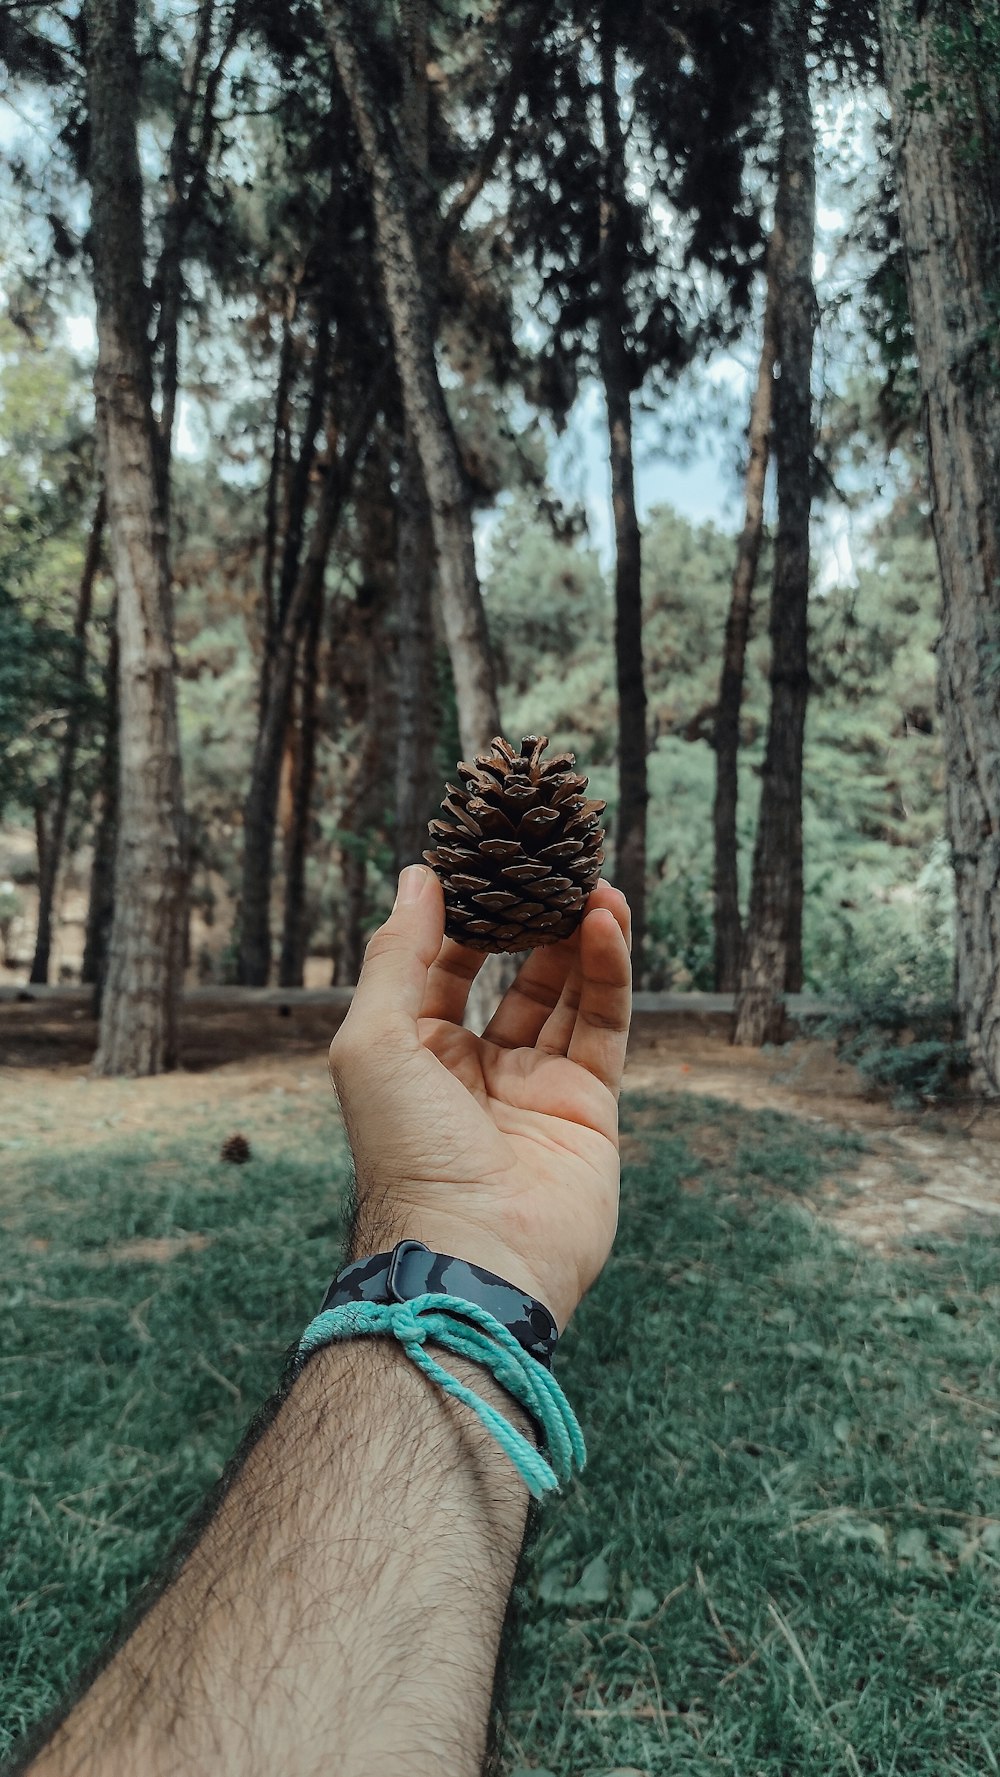 person holding brown pine cone